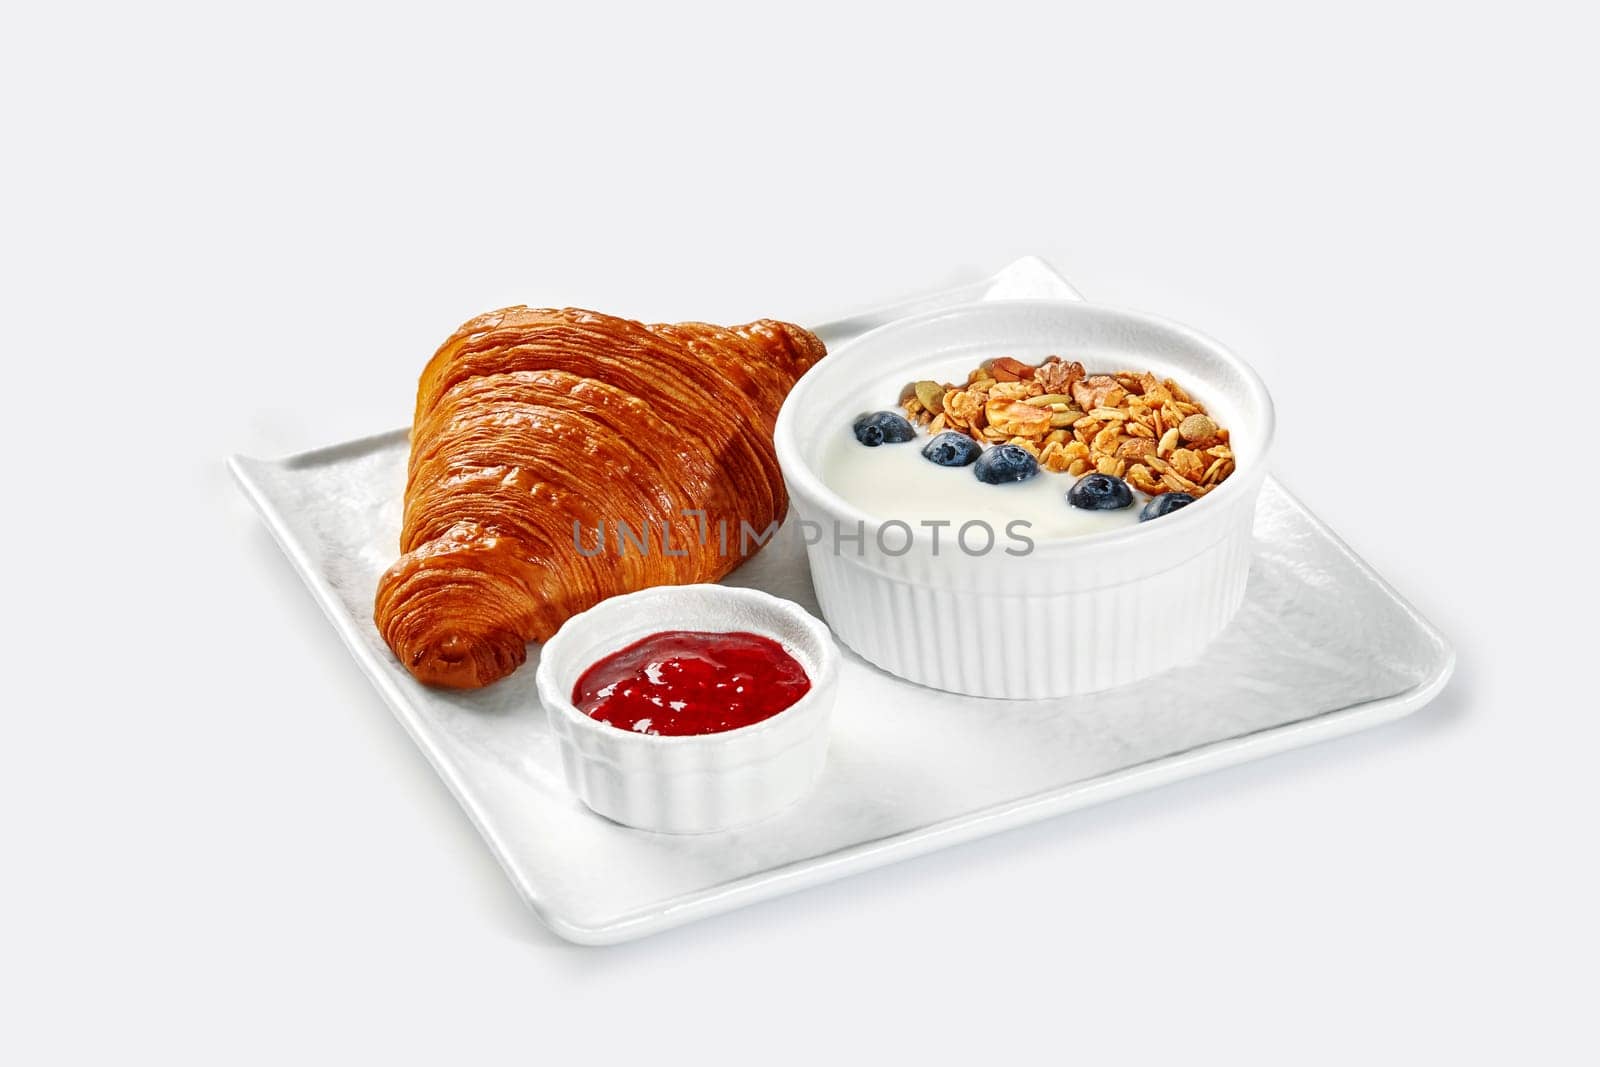 Appetizing breakfast set of golden puff croissant, light creamy yogurt with crispy granola and blueberries, and fresh sweet berry jam on white tray